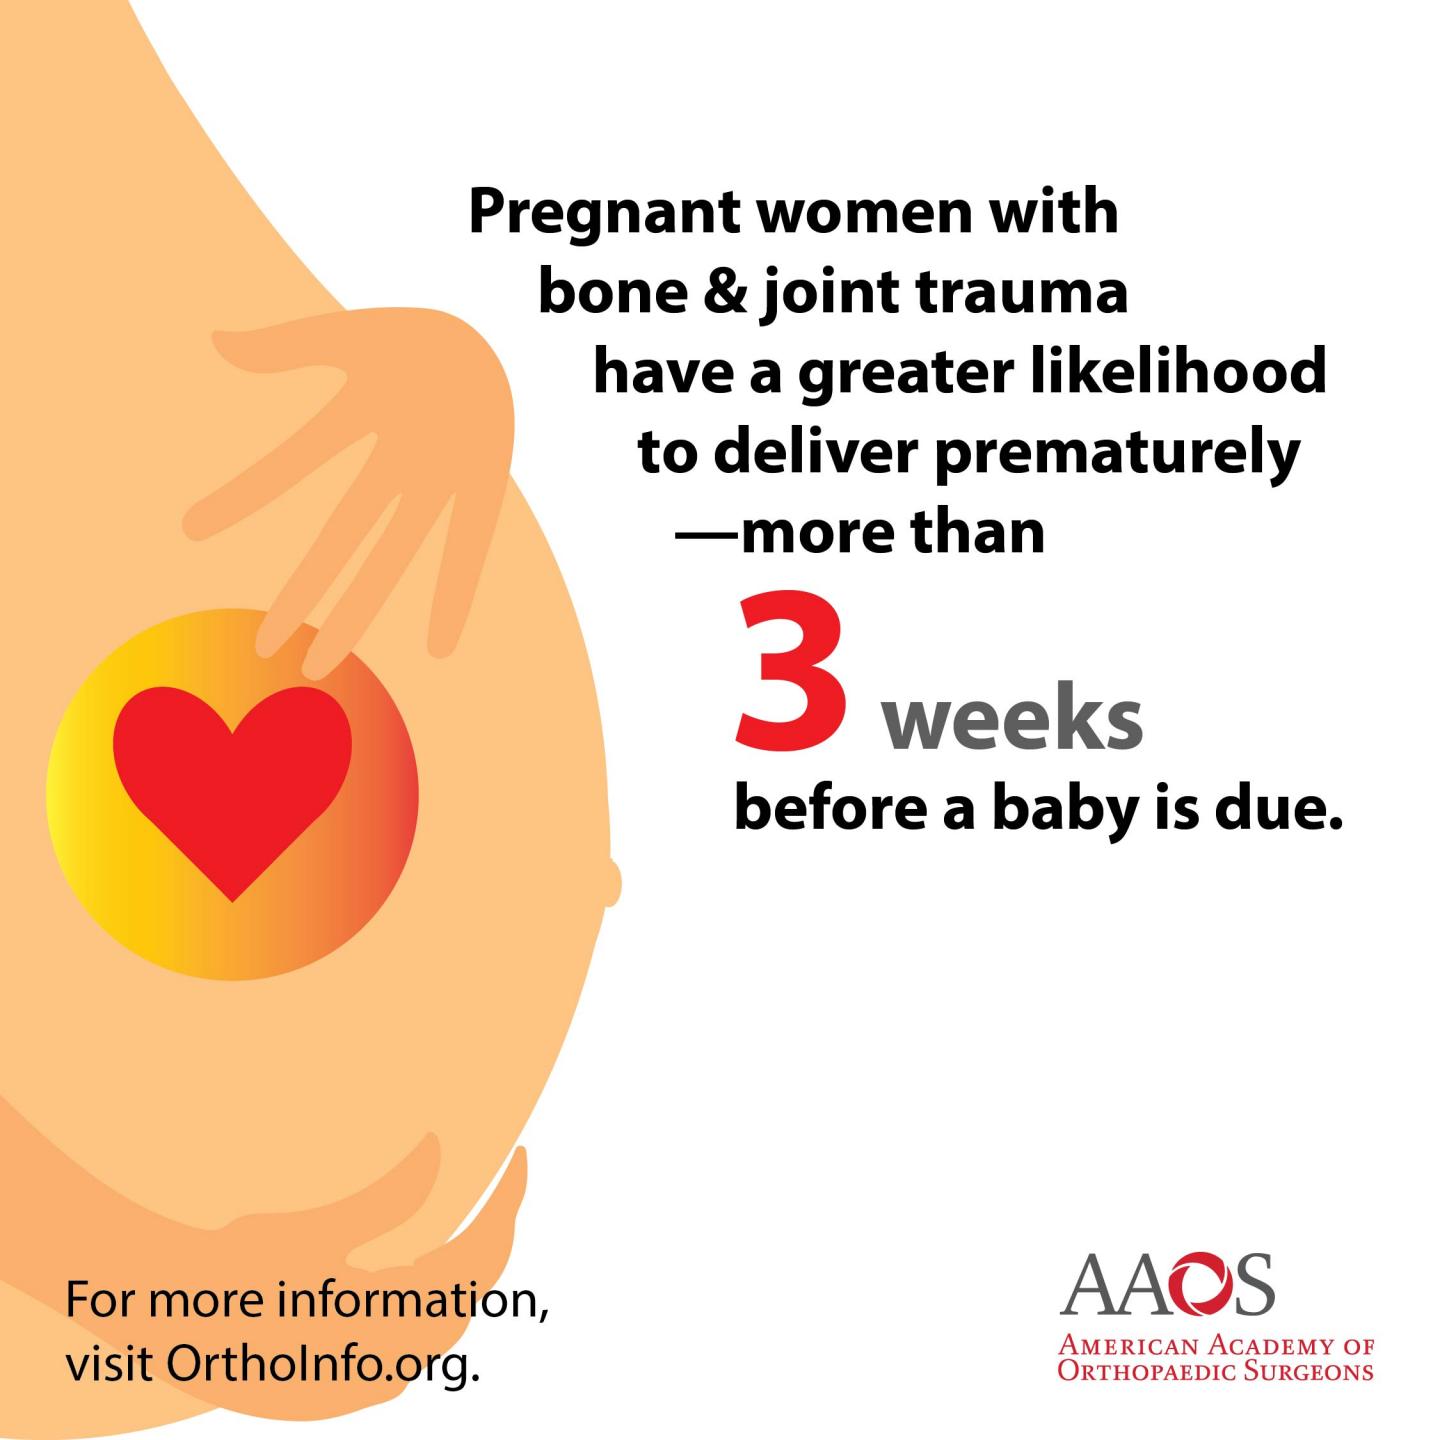 Pregnant Women with Orthopaedic Trauma Have a Greater Likelihood to Deliver Prematurely